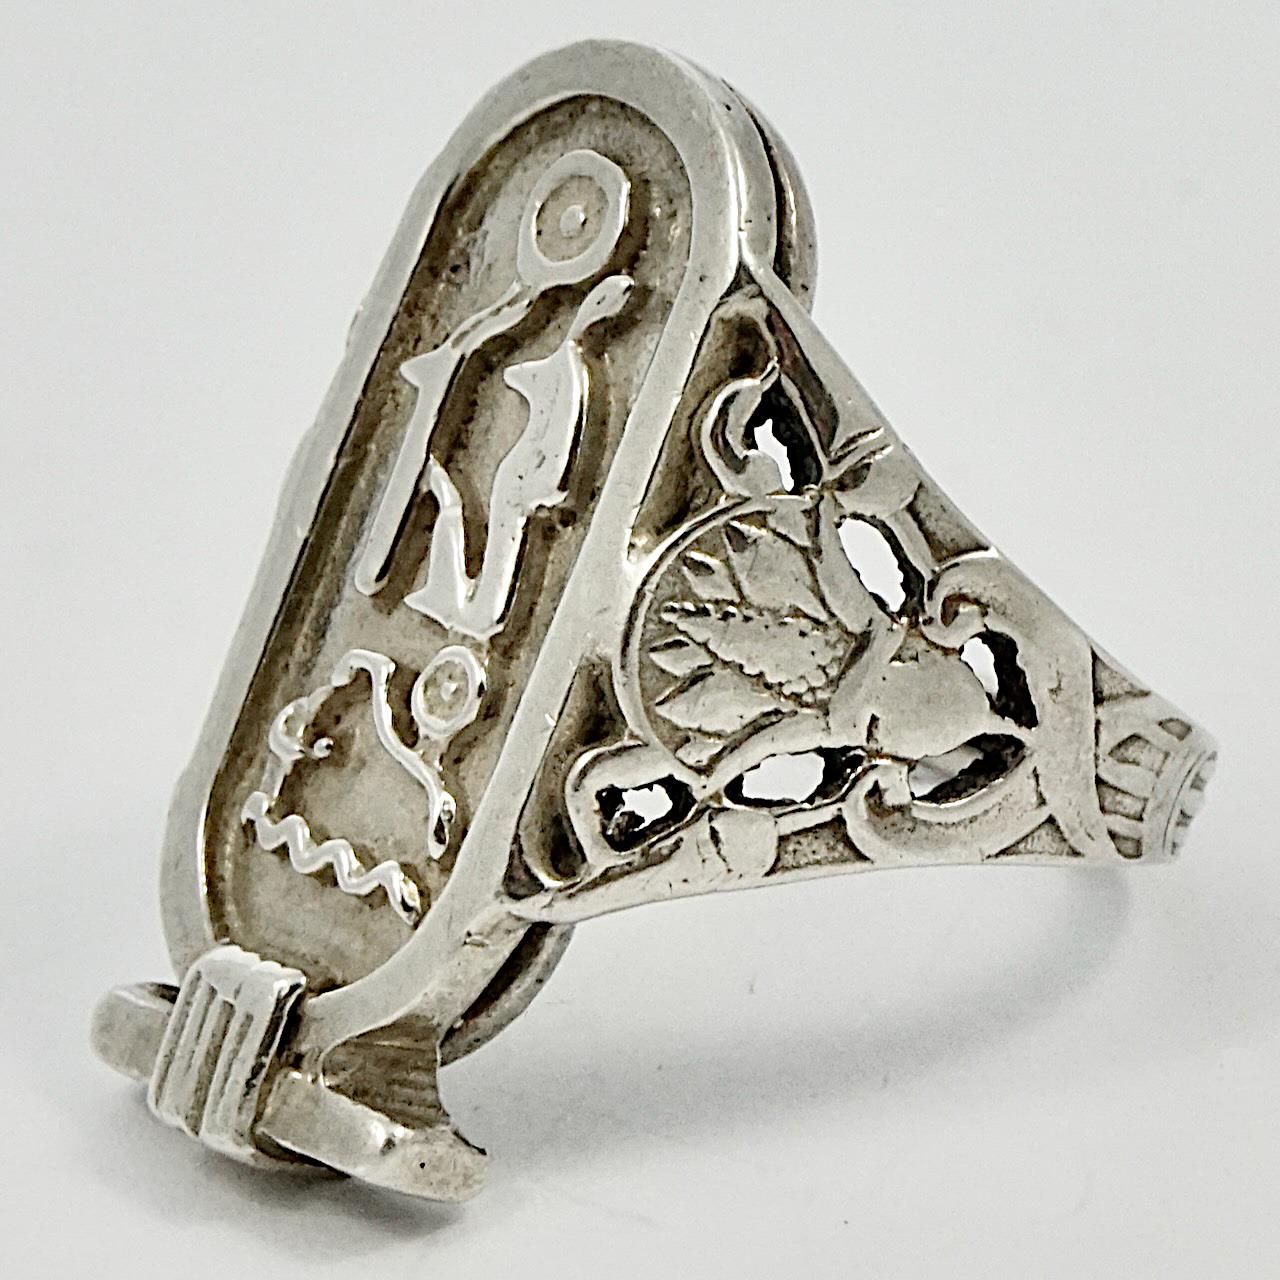 Wonderful sterling silver Egyptian Revival pharaonic cartouche ring with hieroglyphics. The shoulders have a lovely lotus flower decoration. Ring size UK P 1/2, US 7 3/4, inside diameter 1.8 cm / .7 inch, and length at the front 2.6 cm / 1 inch by